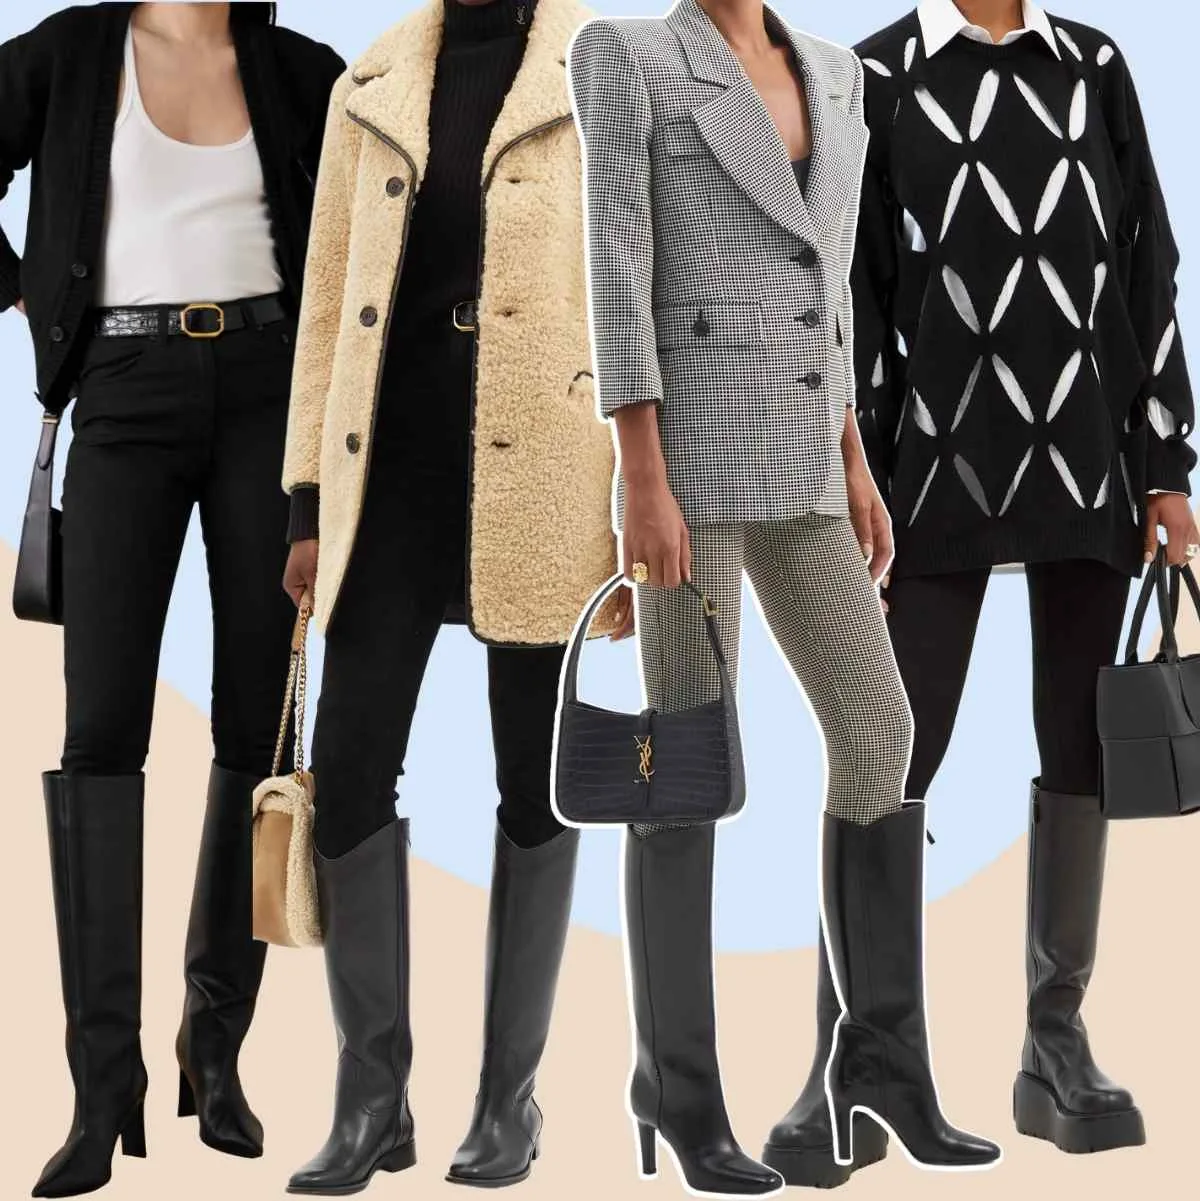 Collage of 5 women different knee boots with leggings.